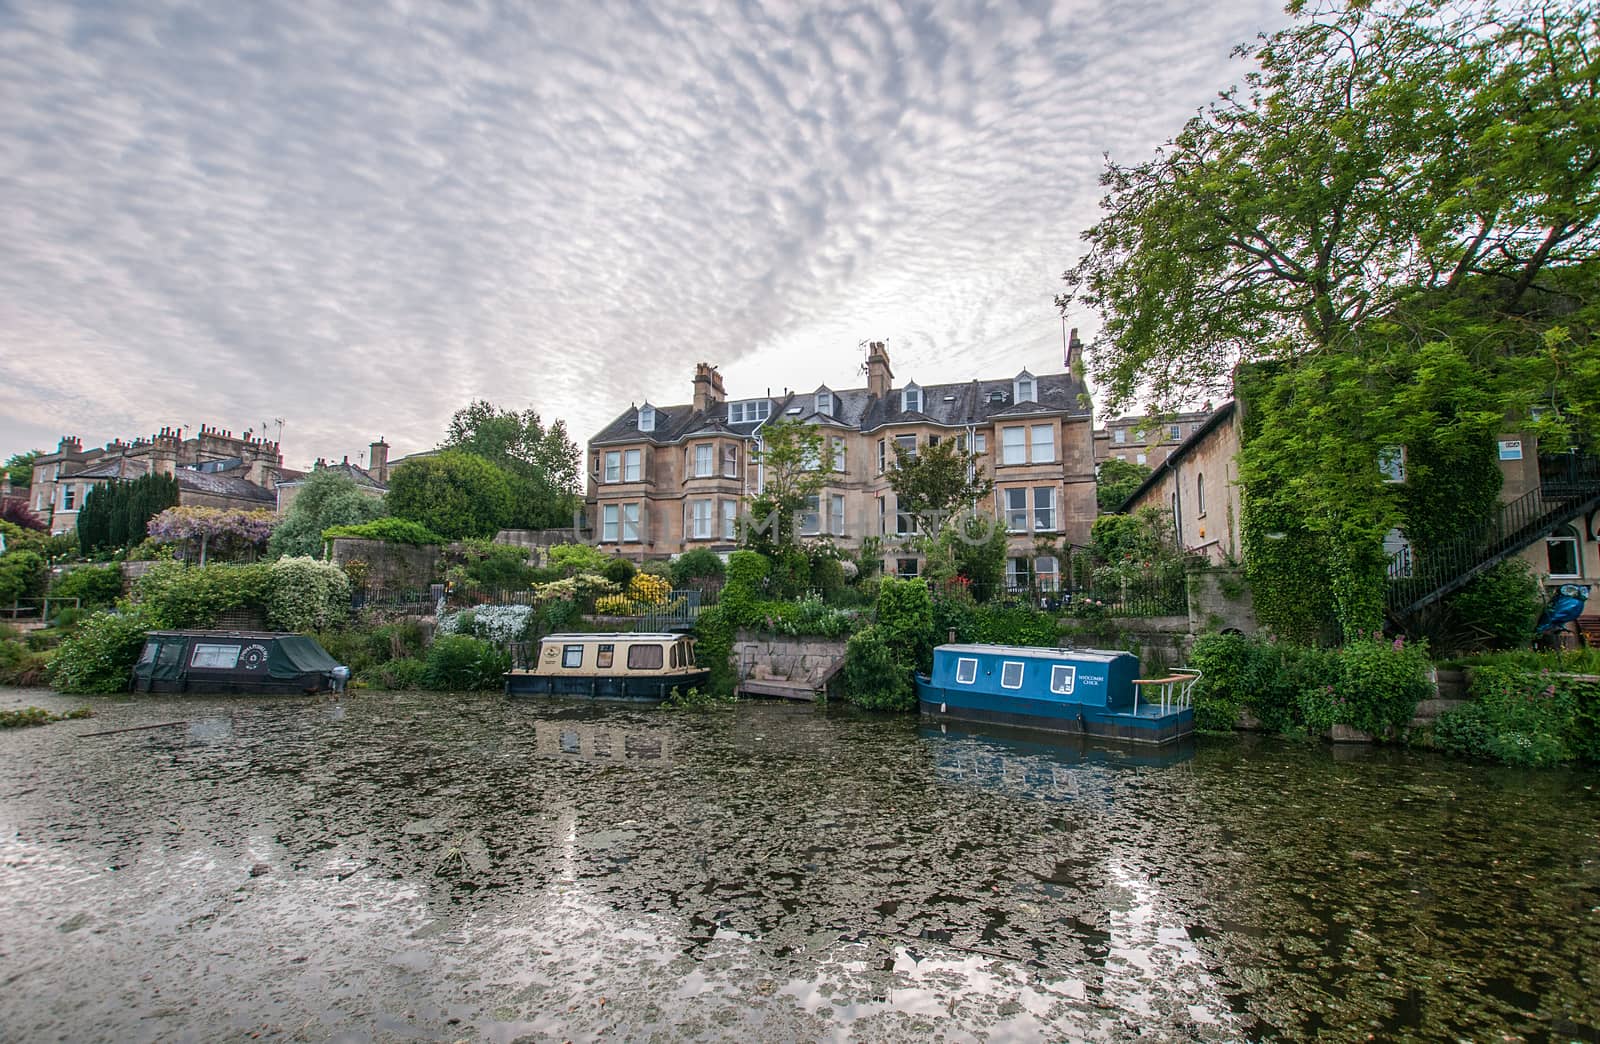 the kennet and avon canal early in the morning against a mackerel sky by sirspread